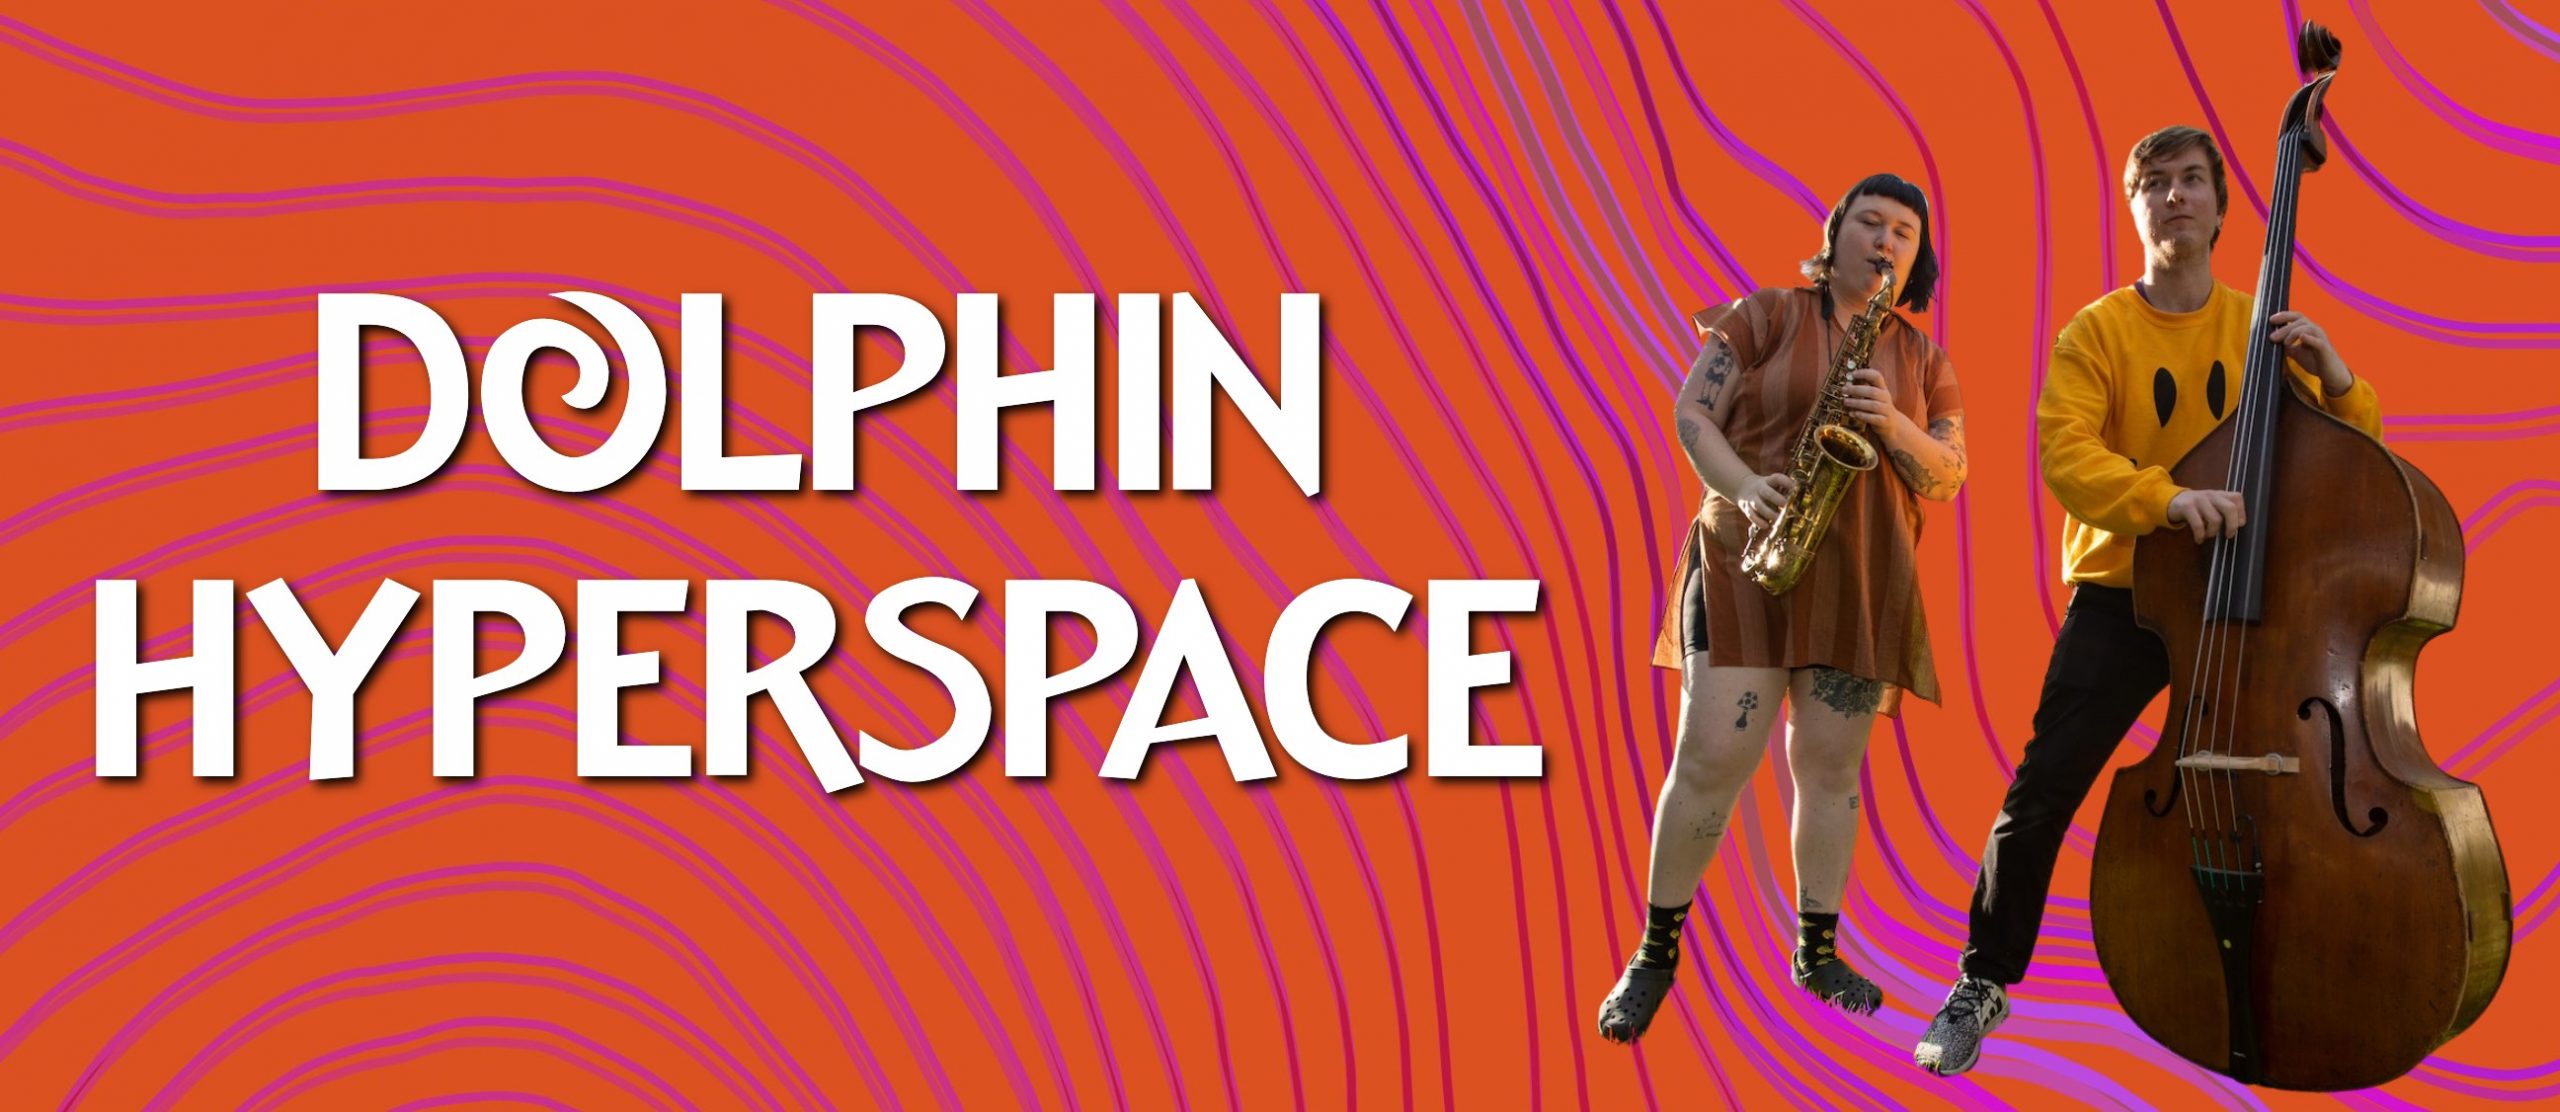 Dolphin Hyperspace